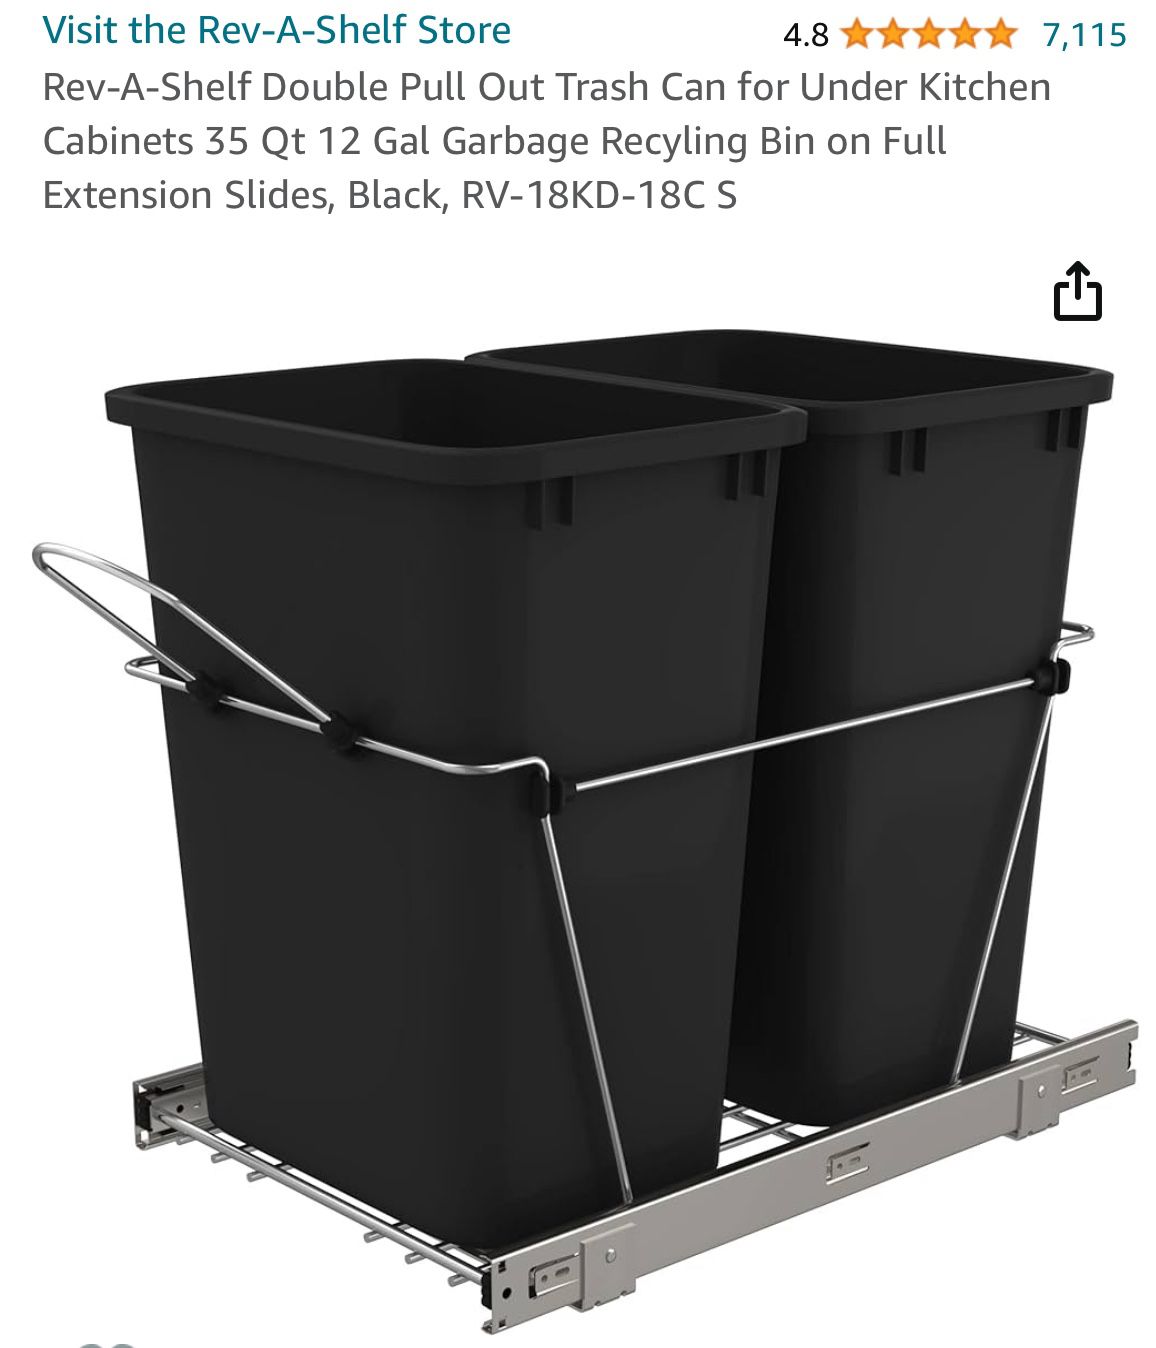 Rev-A-Shelf Double Trash Can Pull Out